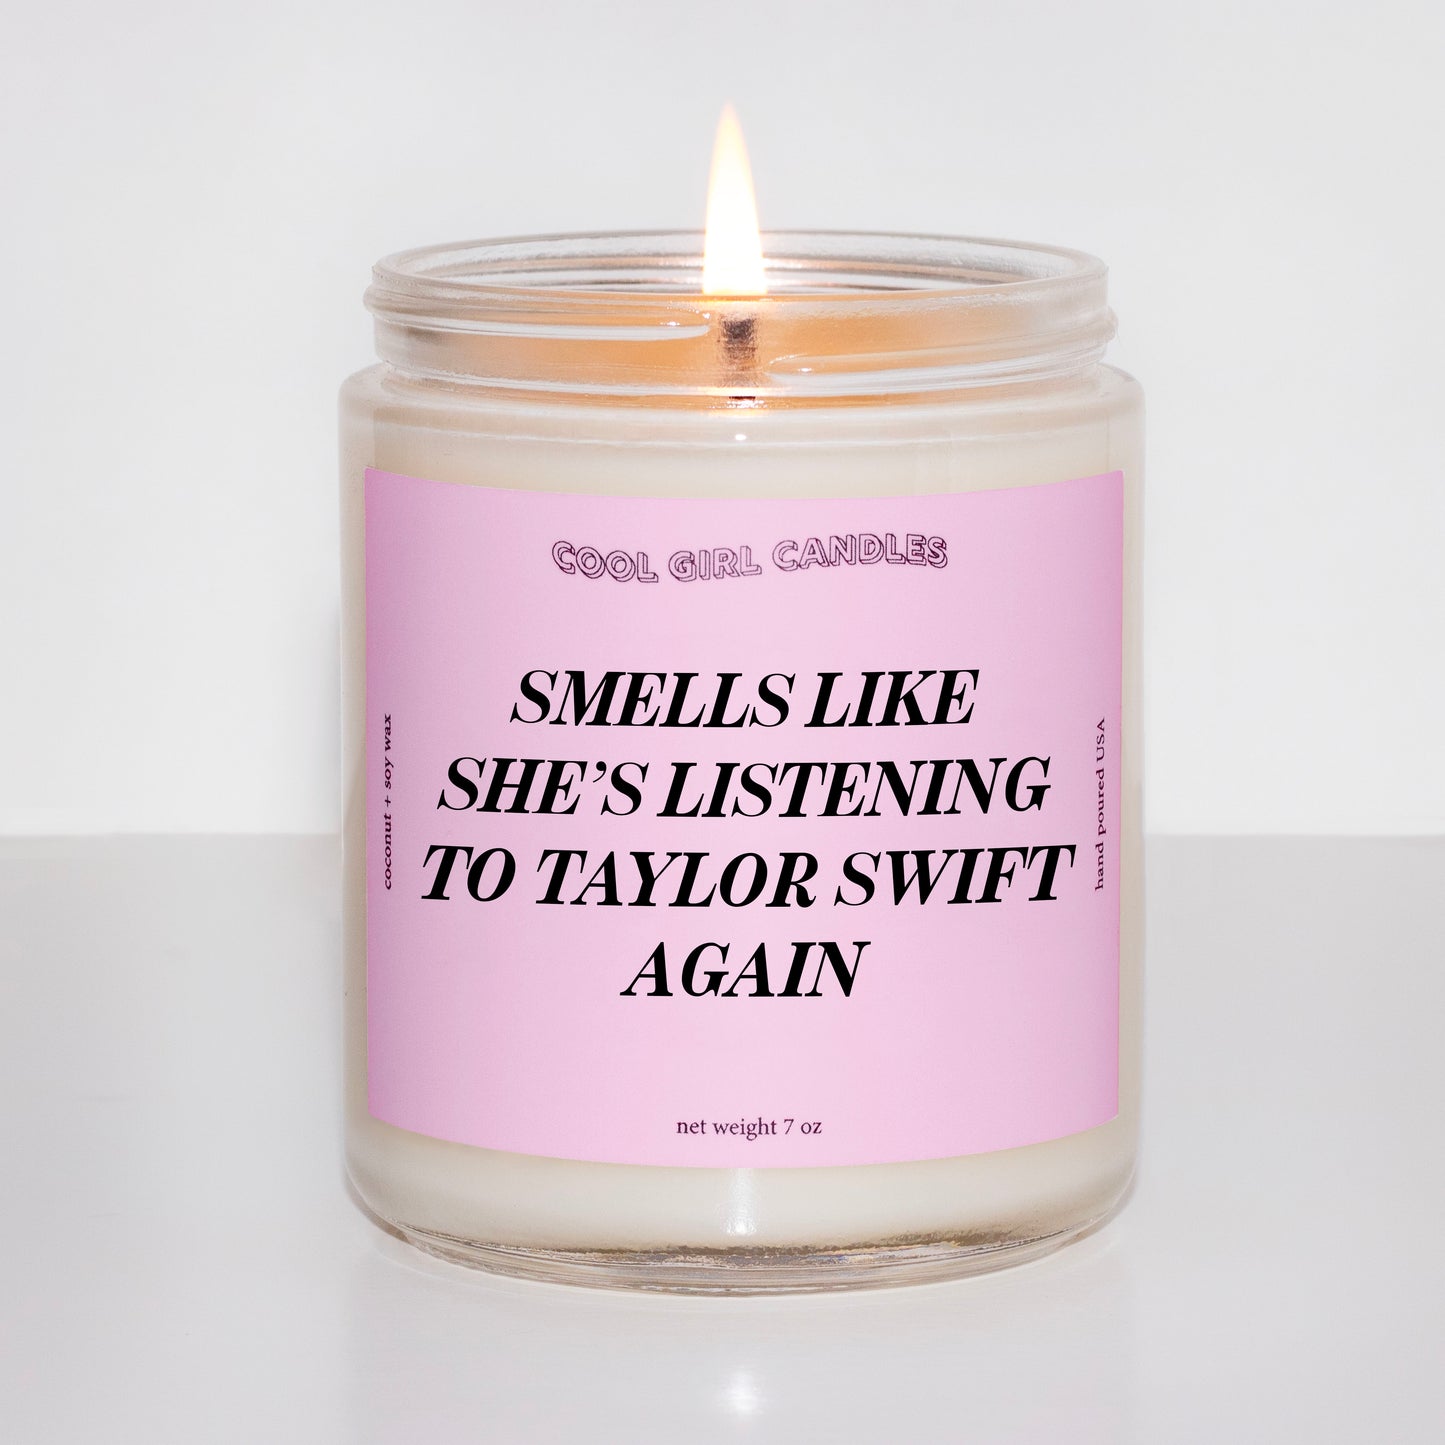 Smells like she's listening to Taylor swift candle gift for Swifties